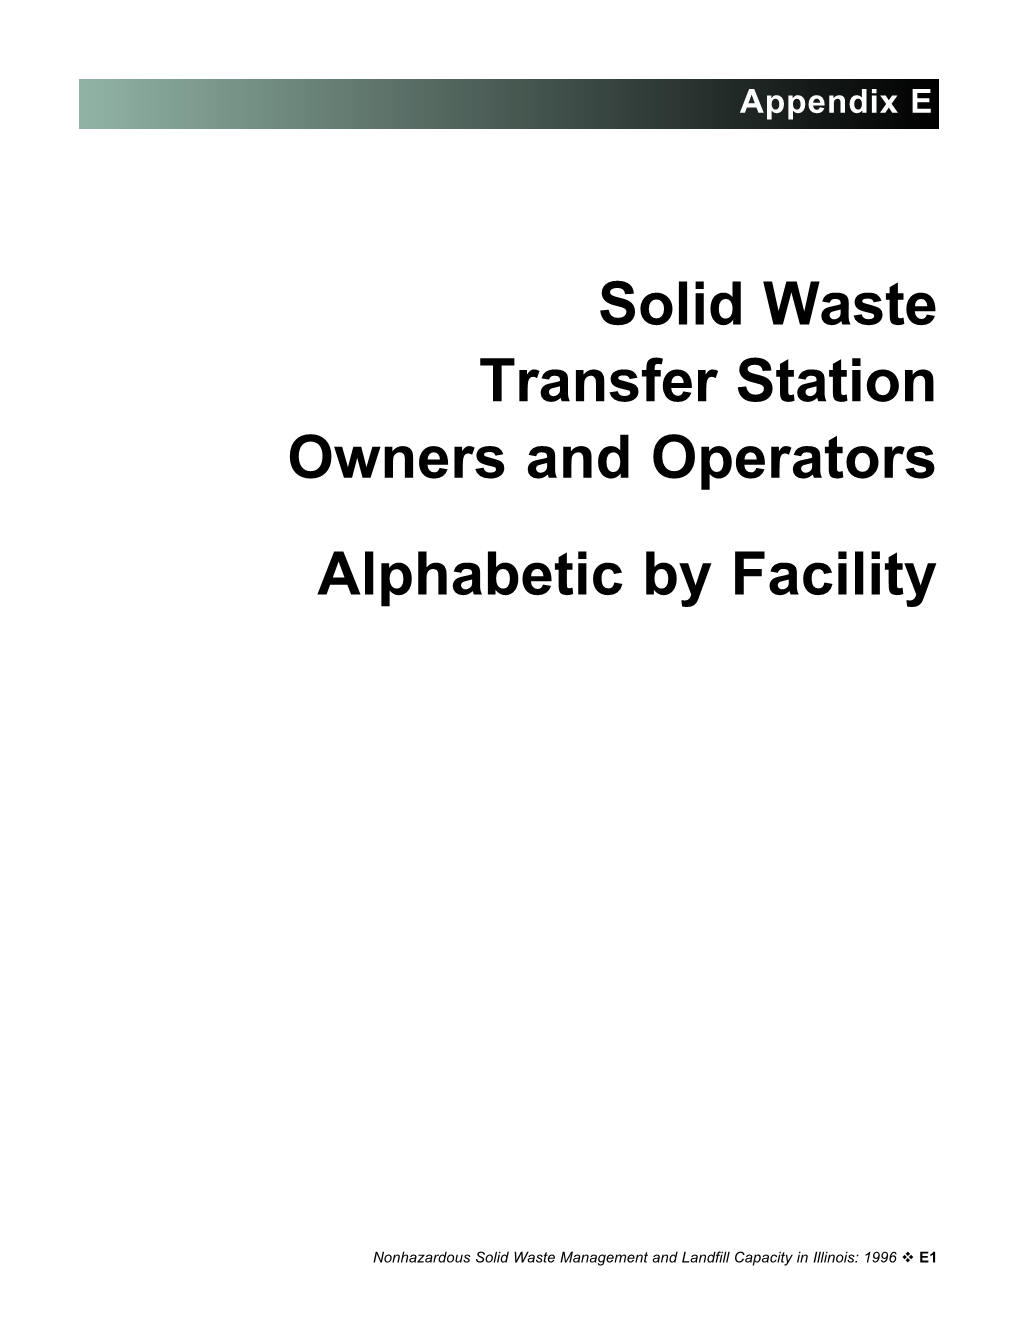 Solid Waste Transfer Station Owners and Operators Alphabetic by Facility